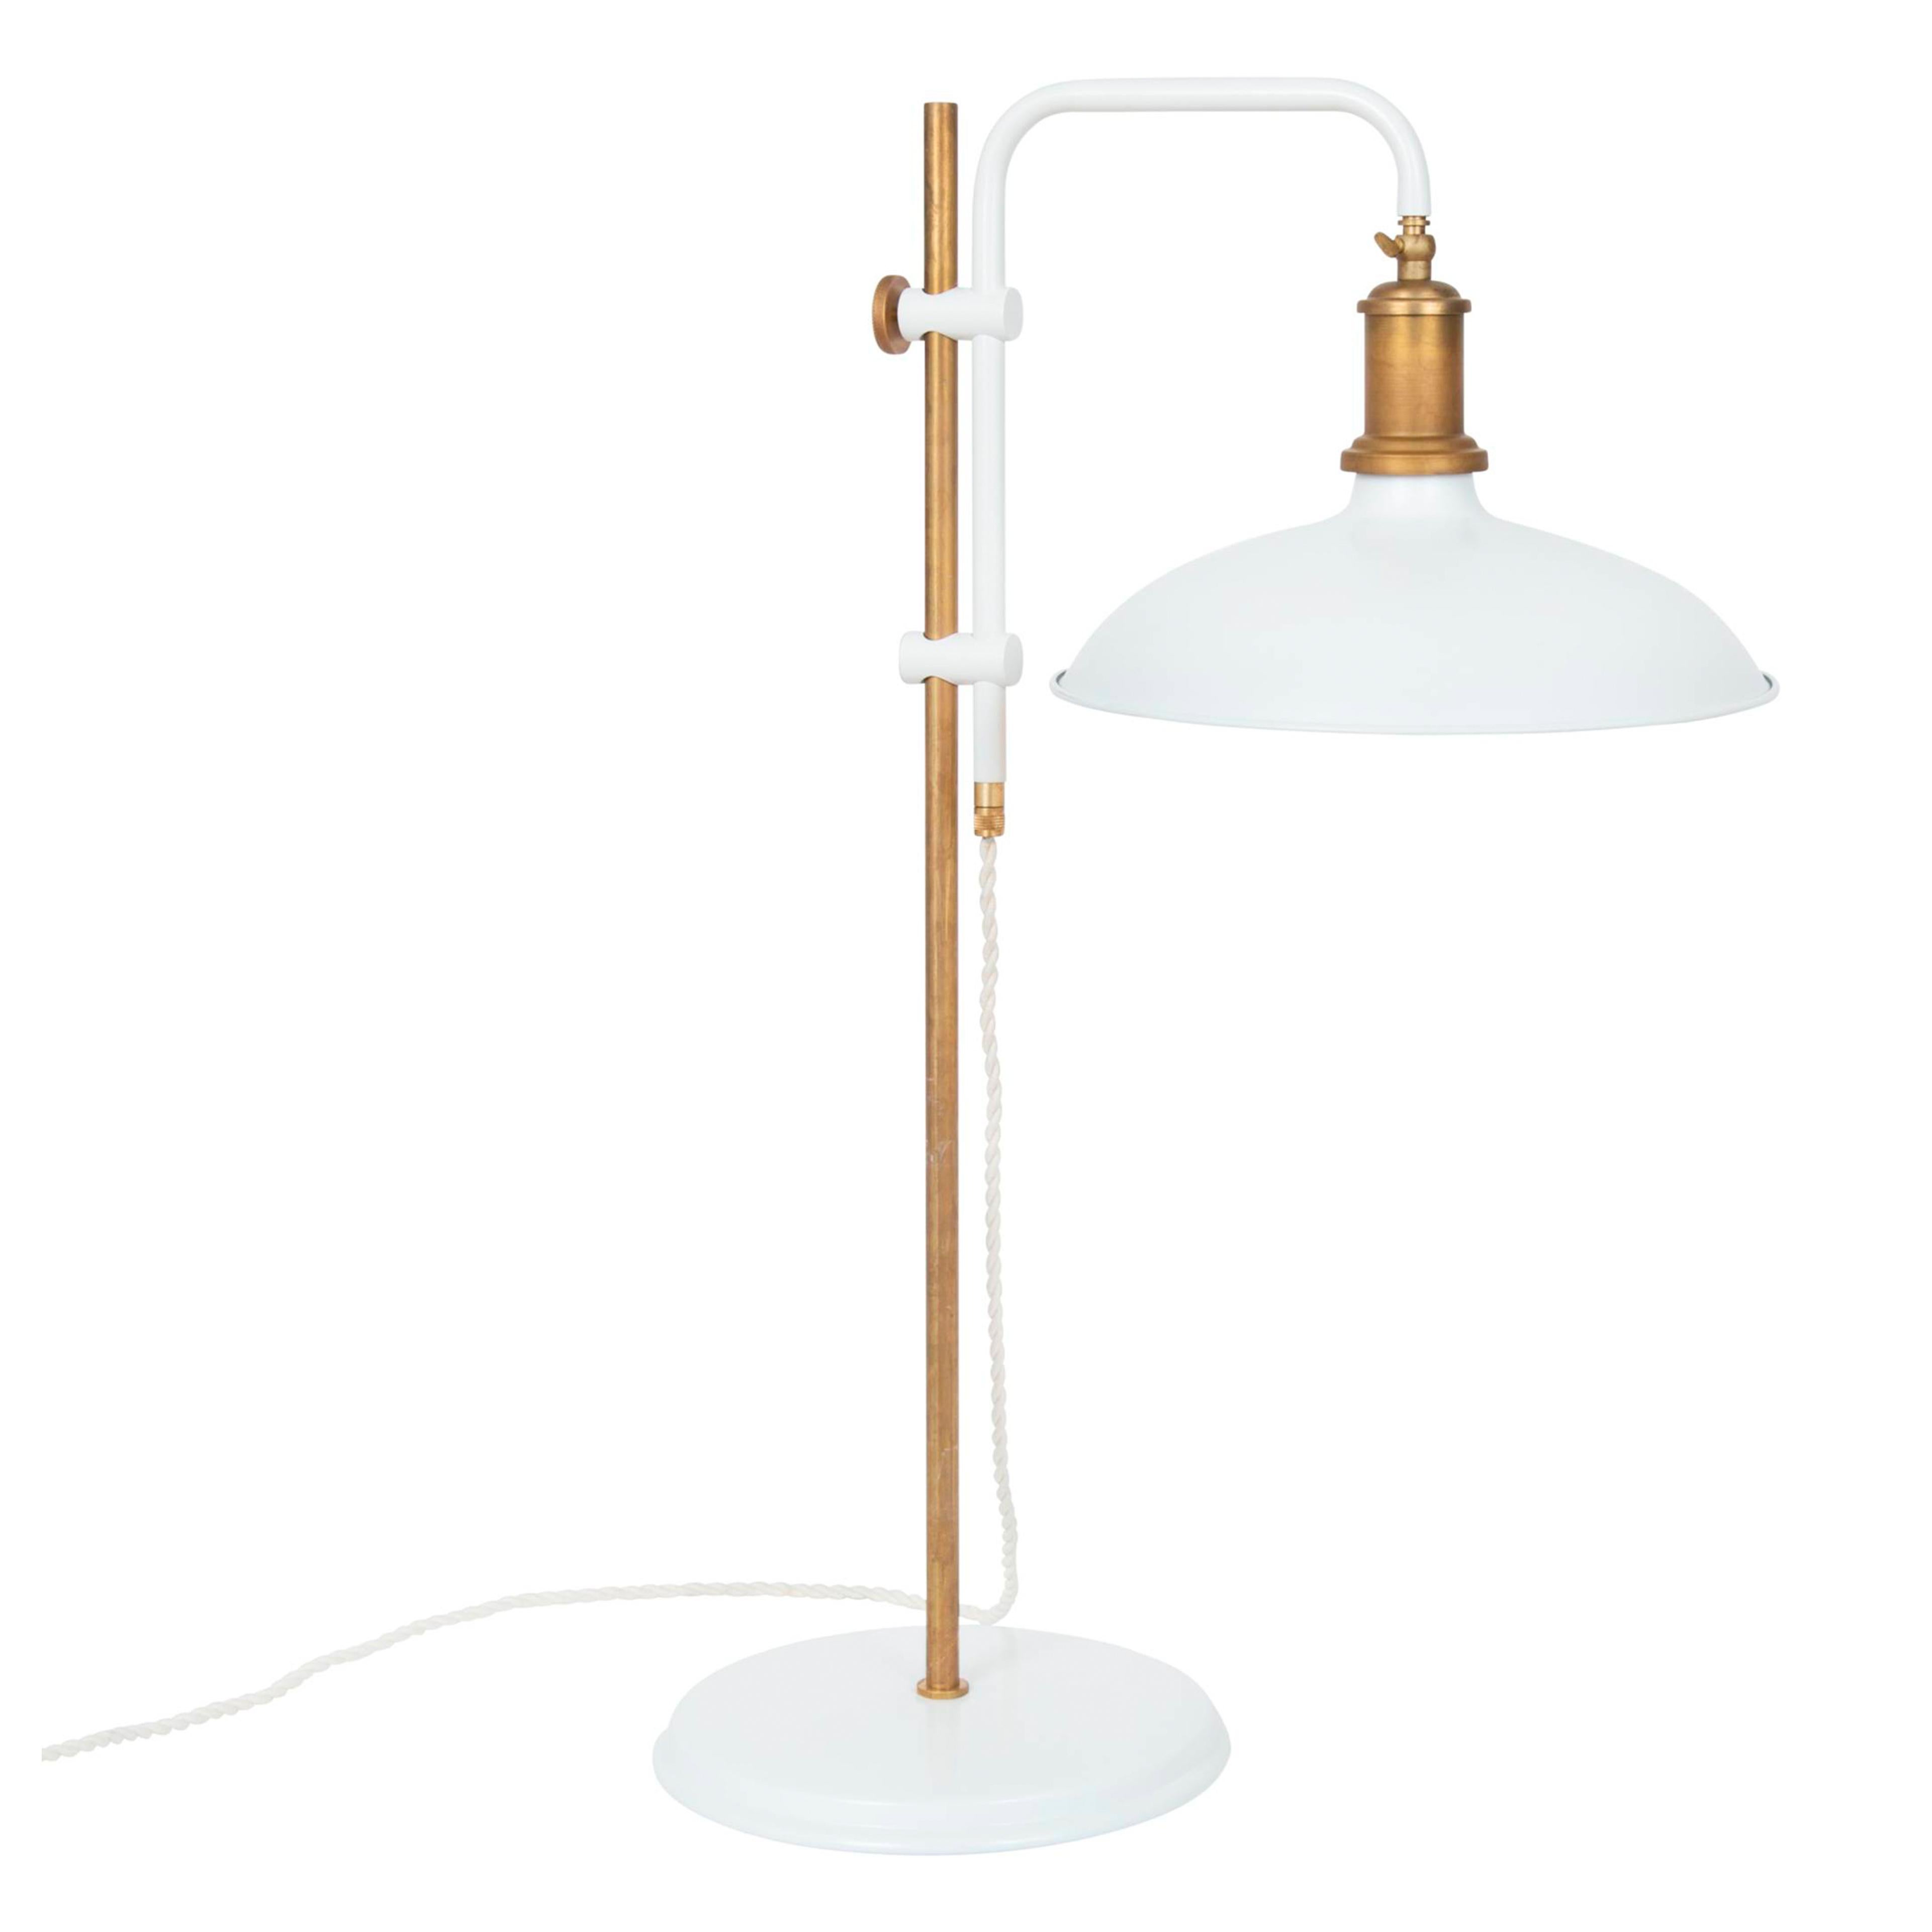 Sabina Grubbeson Kavaljer Table Lamp Designed by Konsthantverk

Raw brass and matt white. Clean, simple and absolutely wonderful shape signed Sabina Grubbeson.

A concentrate of what we stand for.

Cavaliers are also available as ceiling lights and